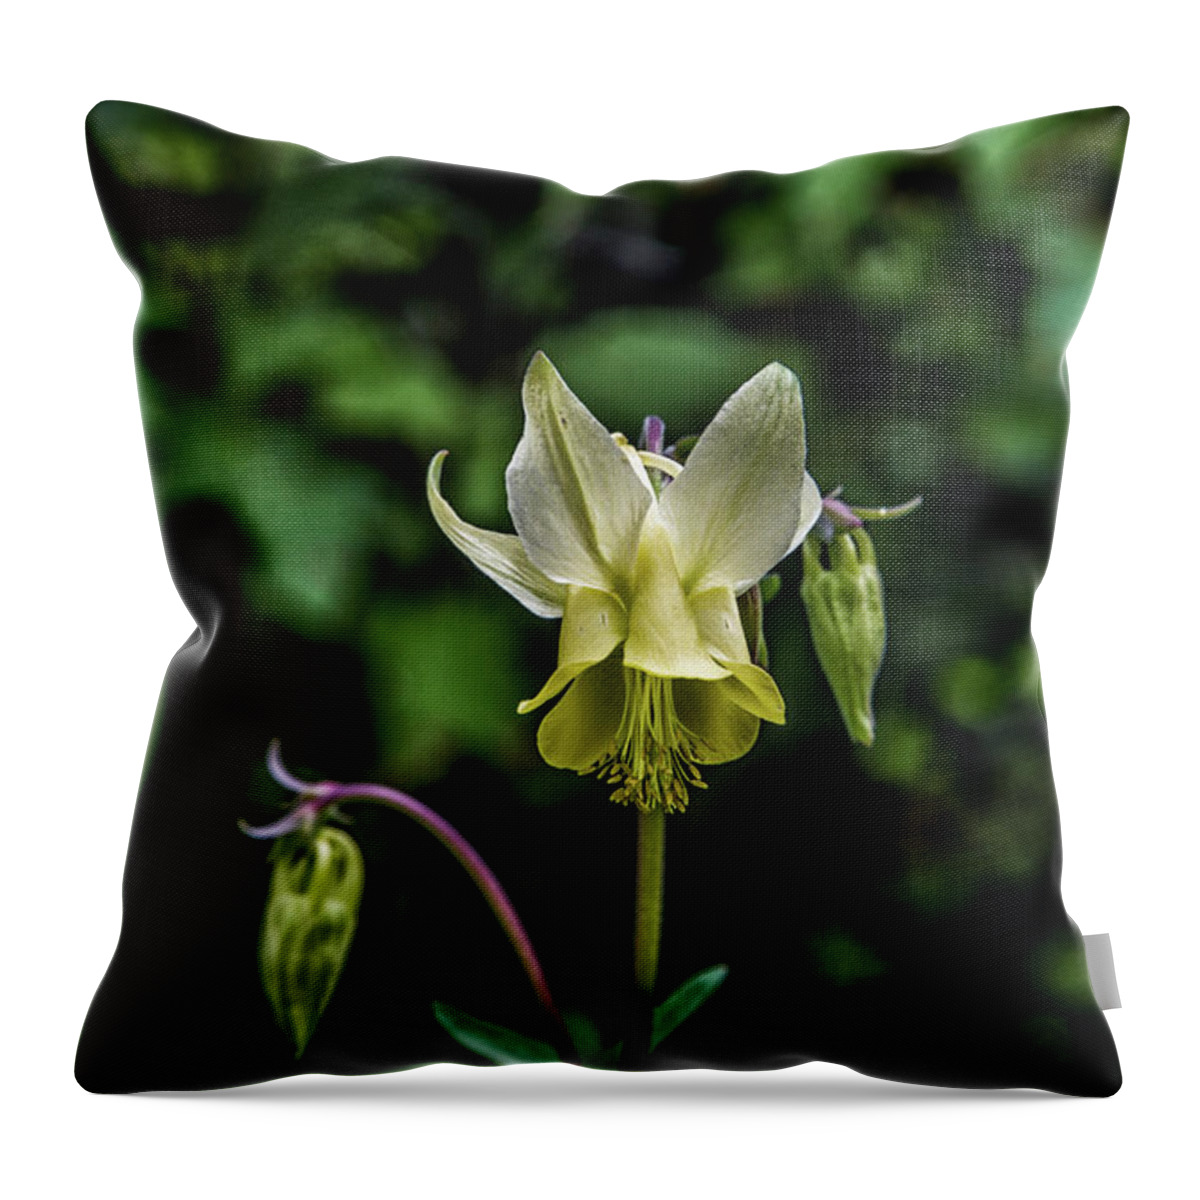 Flowers Throw Pillow featuring the photograph Glacier Lily by Kathy McClure